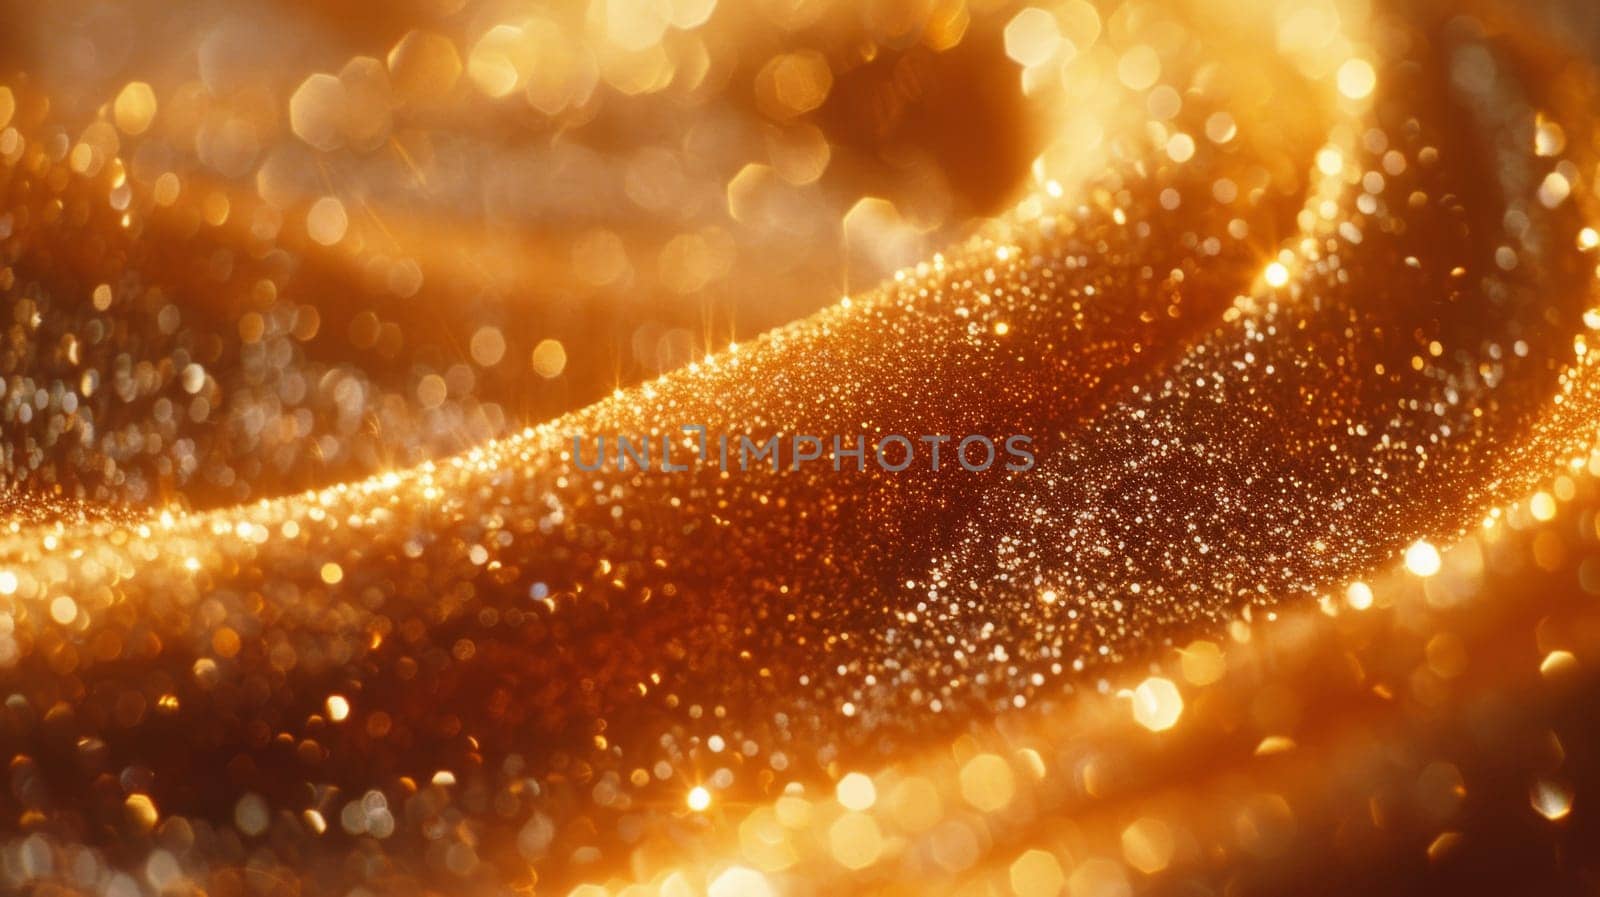 A close up of a shiny gold fabric with some sparkles, AI by starush